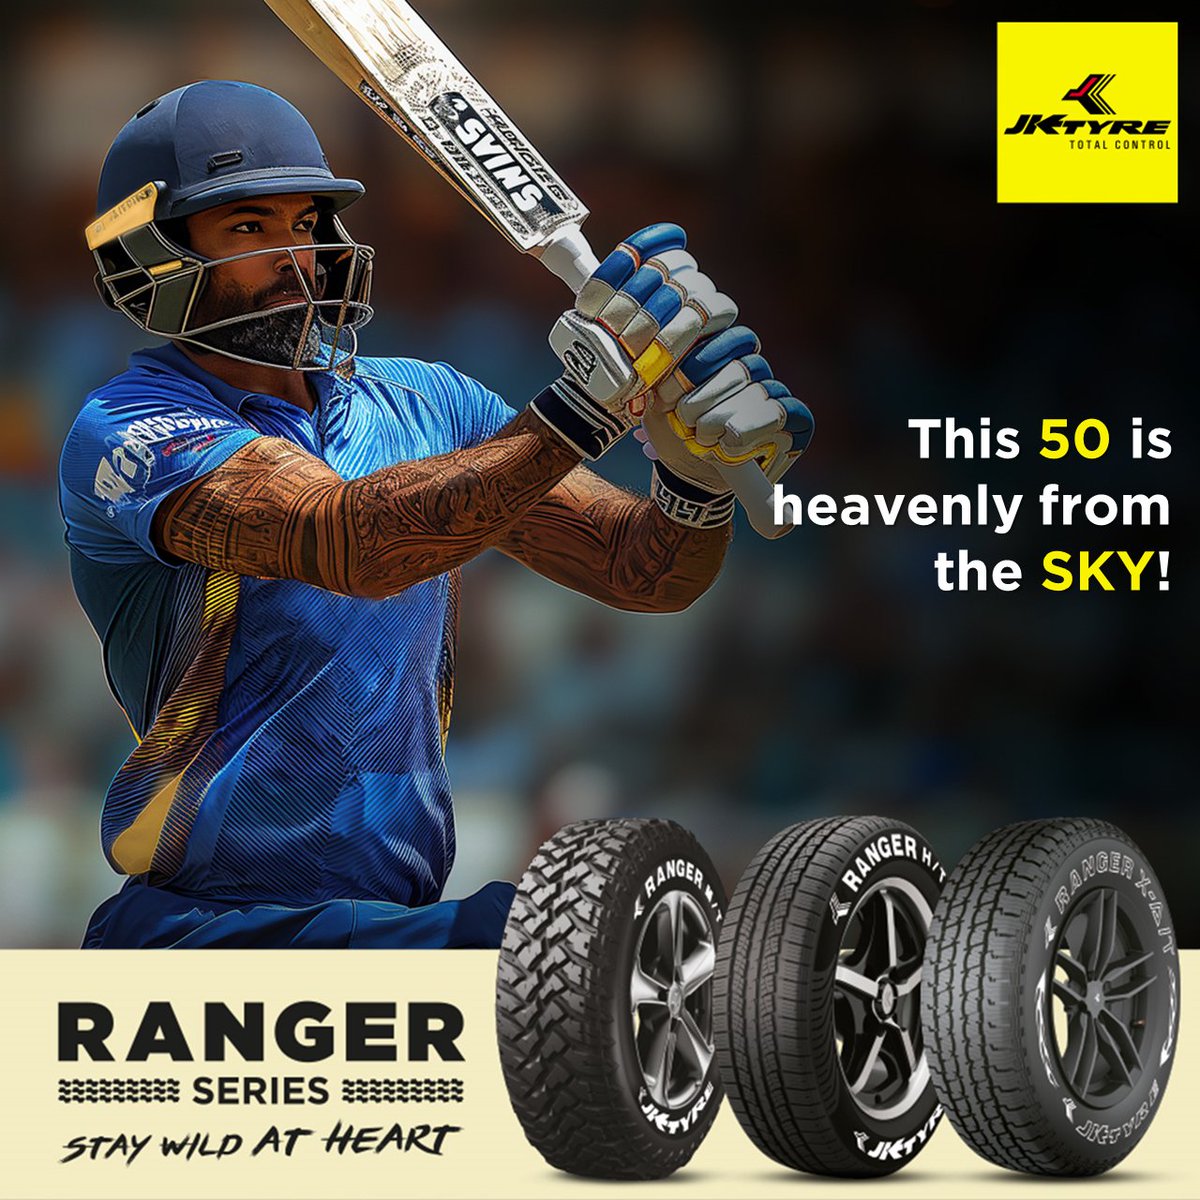 An innings so wild you can't take your eyes off it, just like a ride with our Ranger series tyre.

Check out the #RangerSeries from JK Tyre, built for adventures, and multiple terrains, for those who are ‘Wild at Heart’.

#JKTyre #IndianT20League #Hyderabad #Mumbai